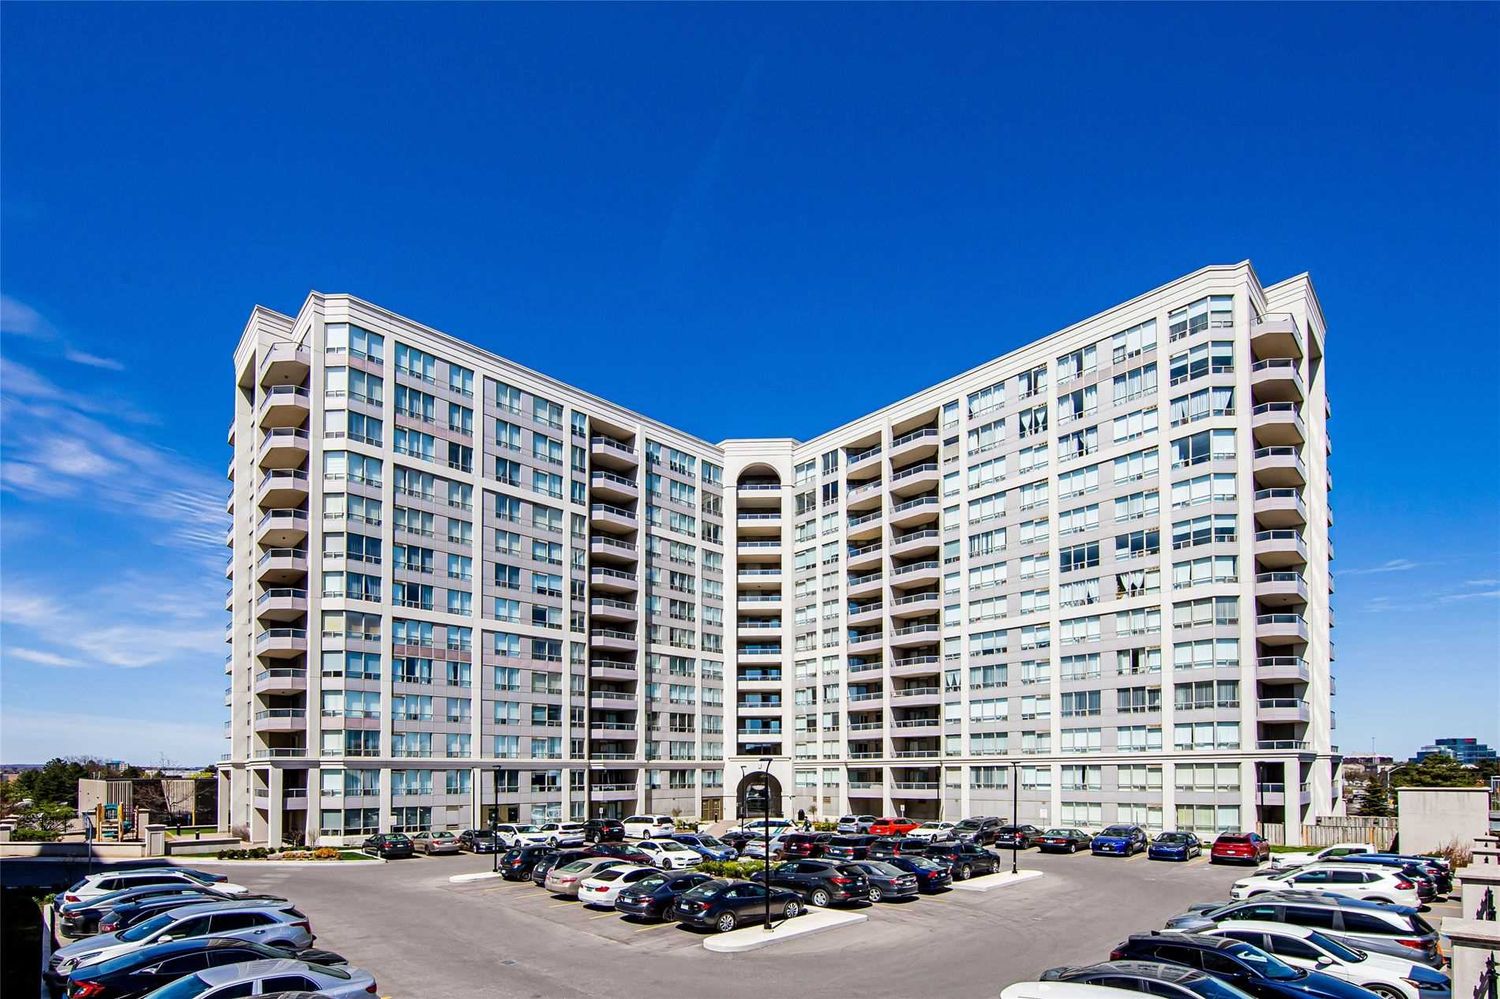 9017 Leslie Street. Grand Parkway II Condos is located in  Richmond Hill, Toronto - image #1 of 2